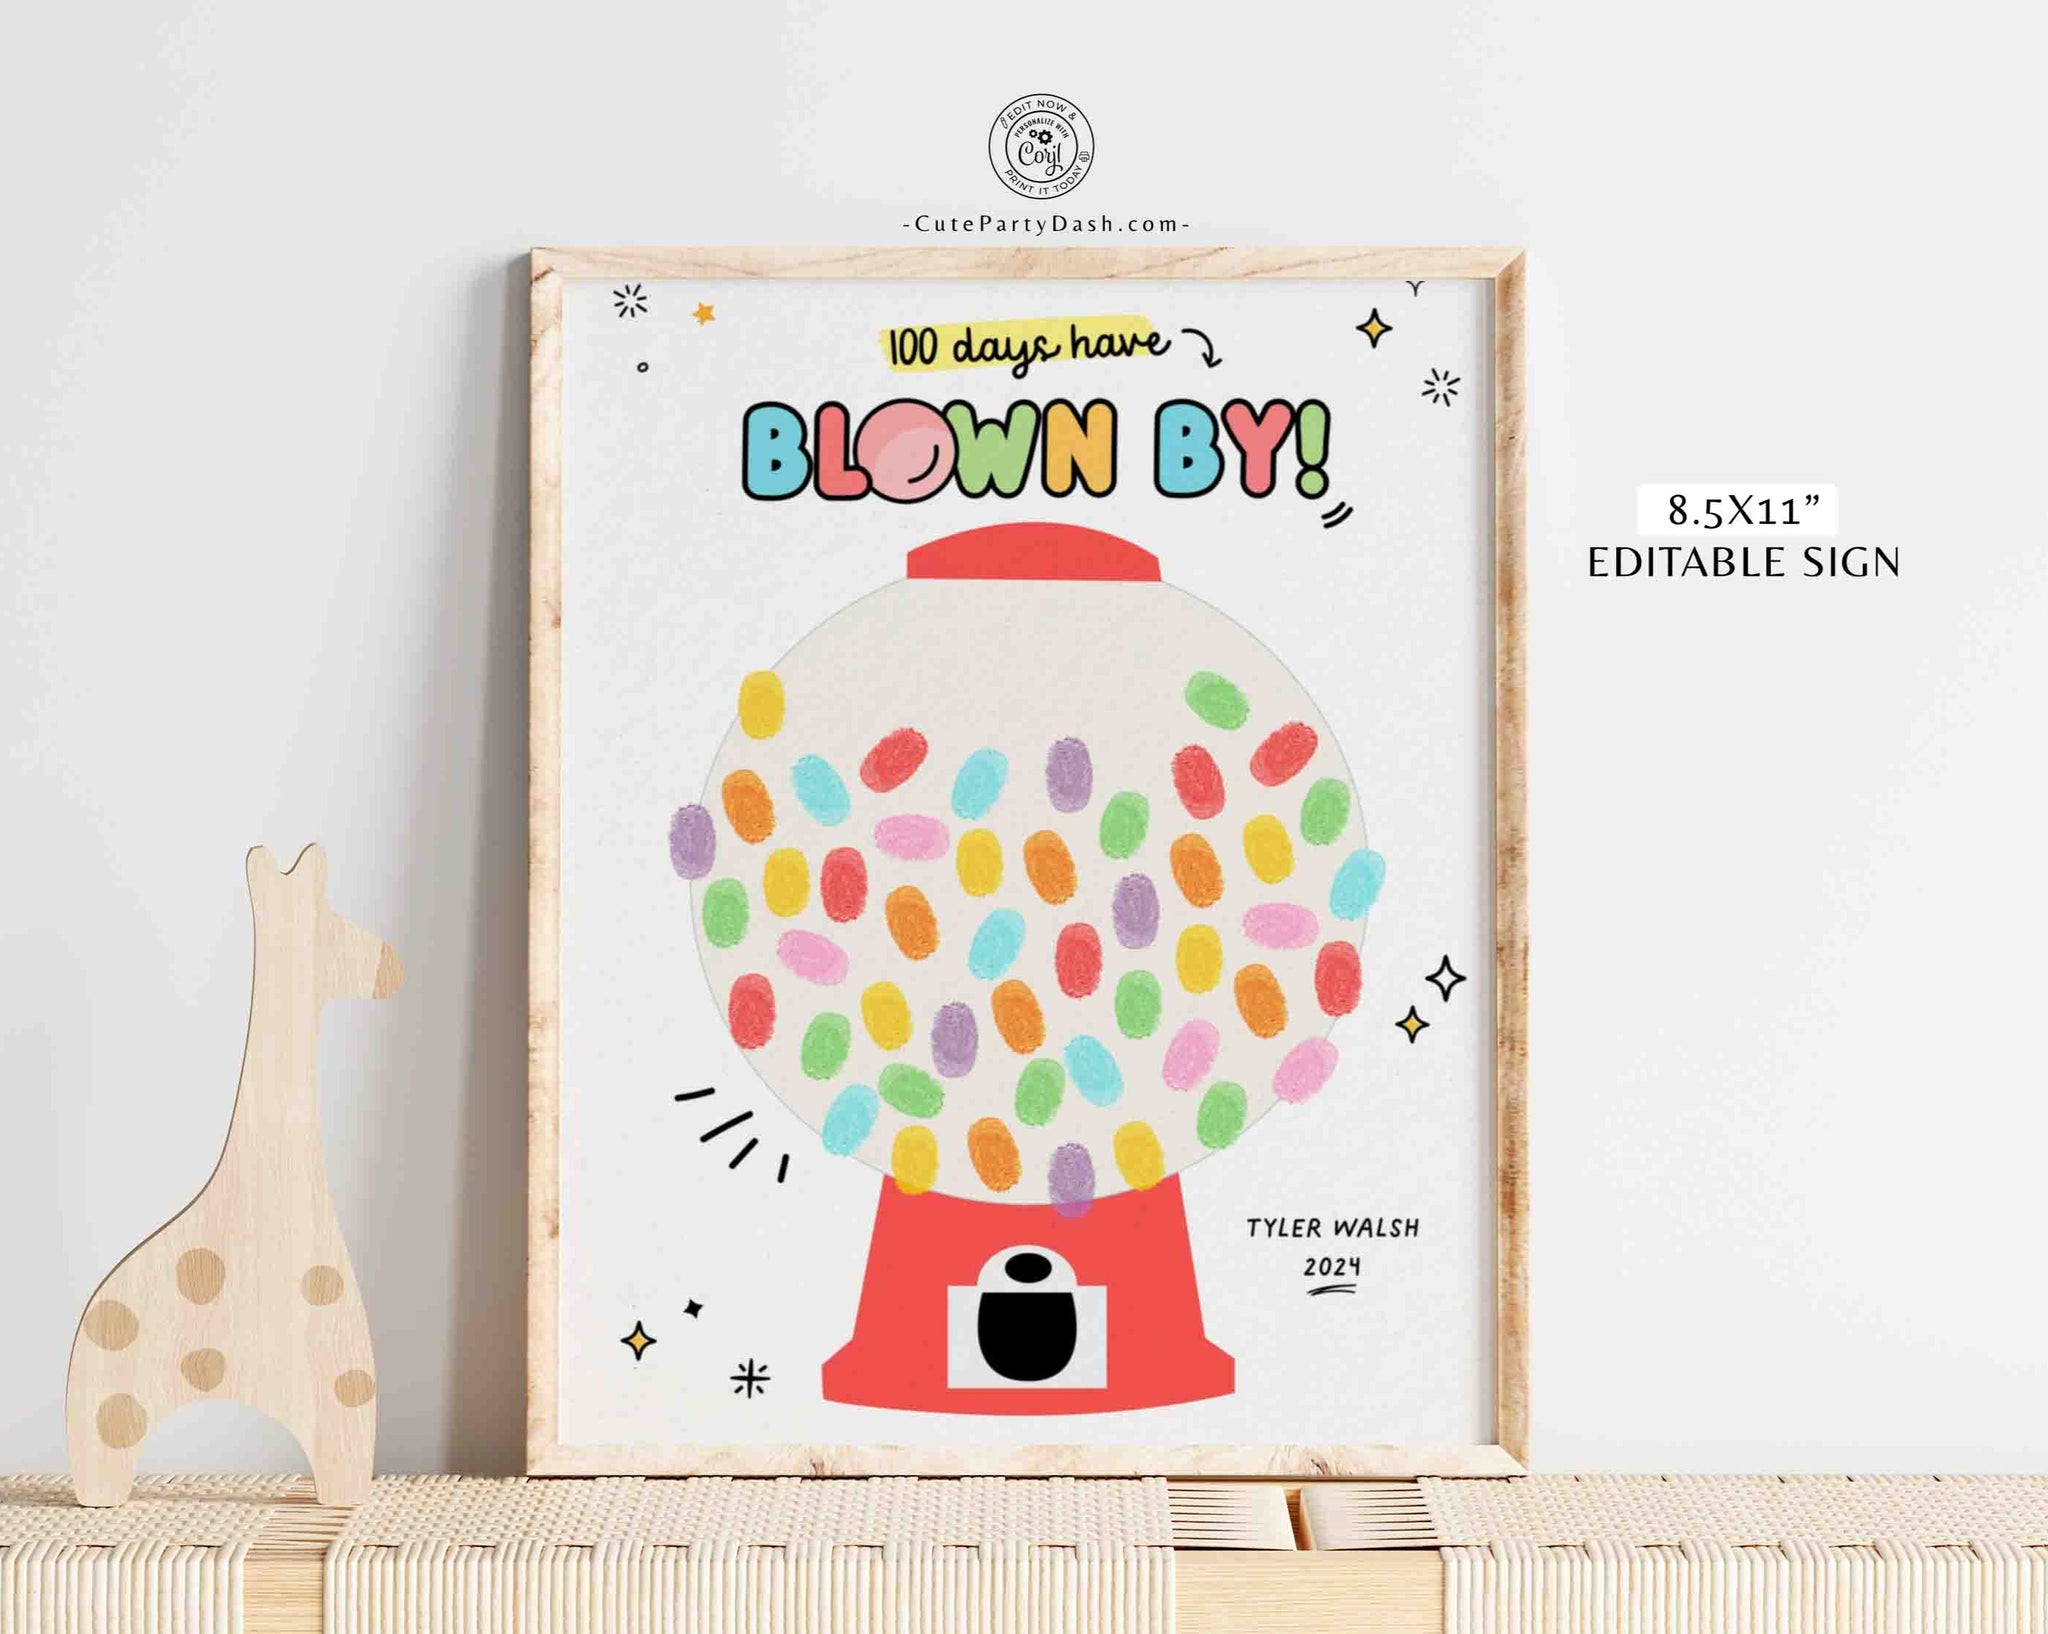 Editable 100th Day of School Handrpint Classroom Activity Printable INSTANT DOWNLOAD 100 Days of School Blown By Fingerprint craft Gumball